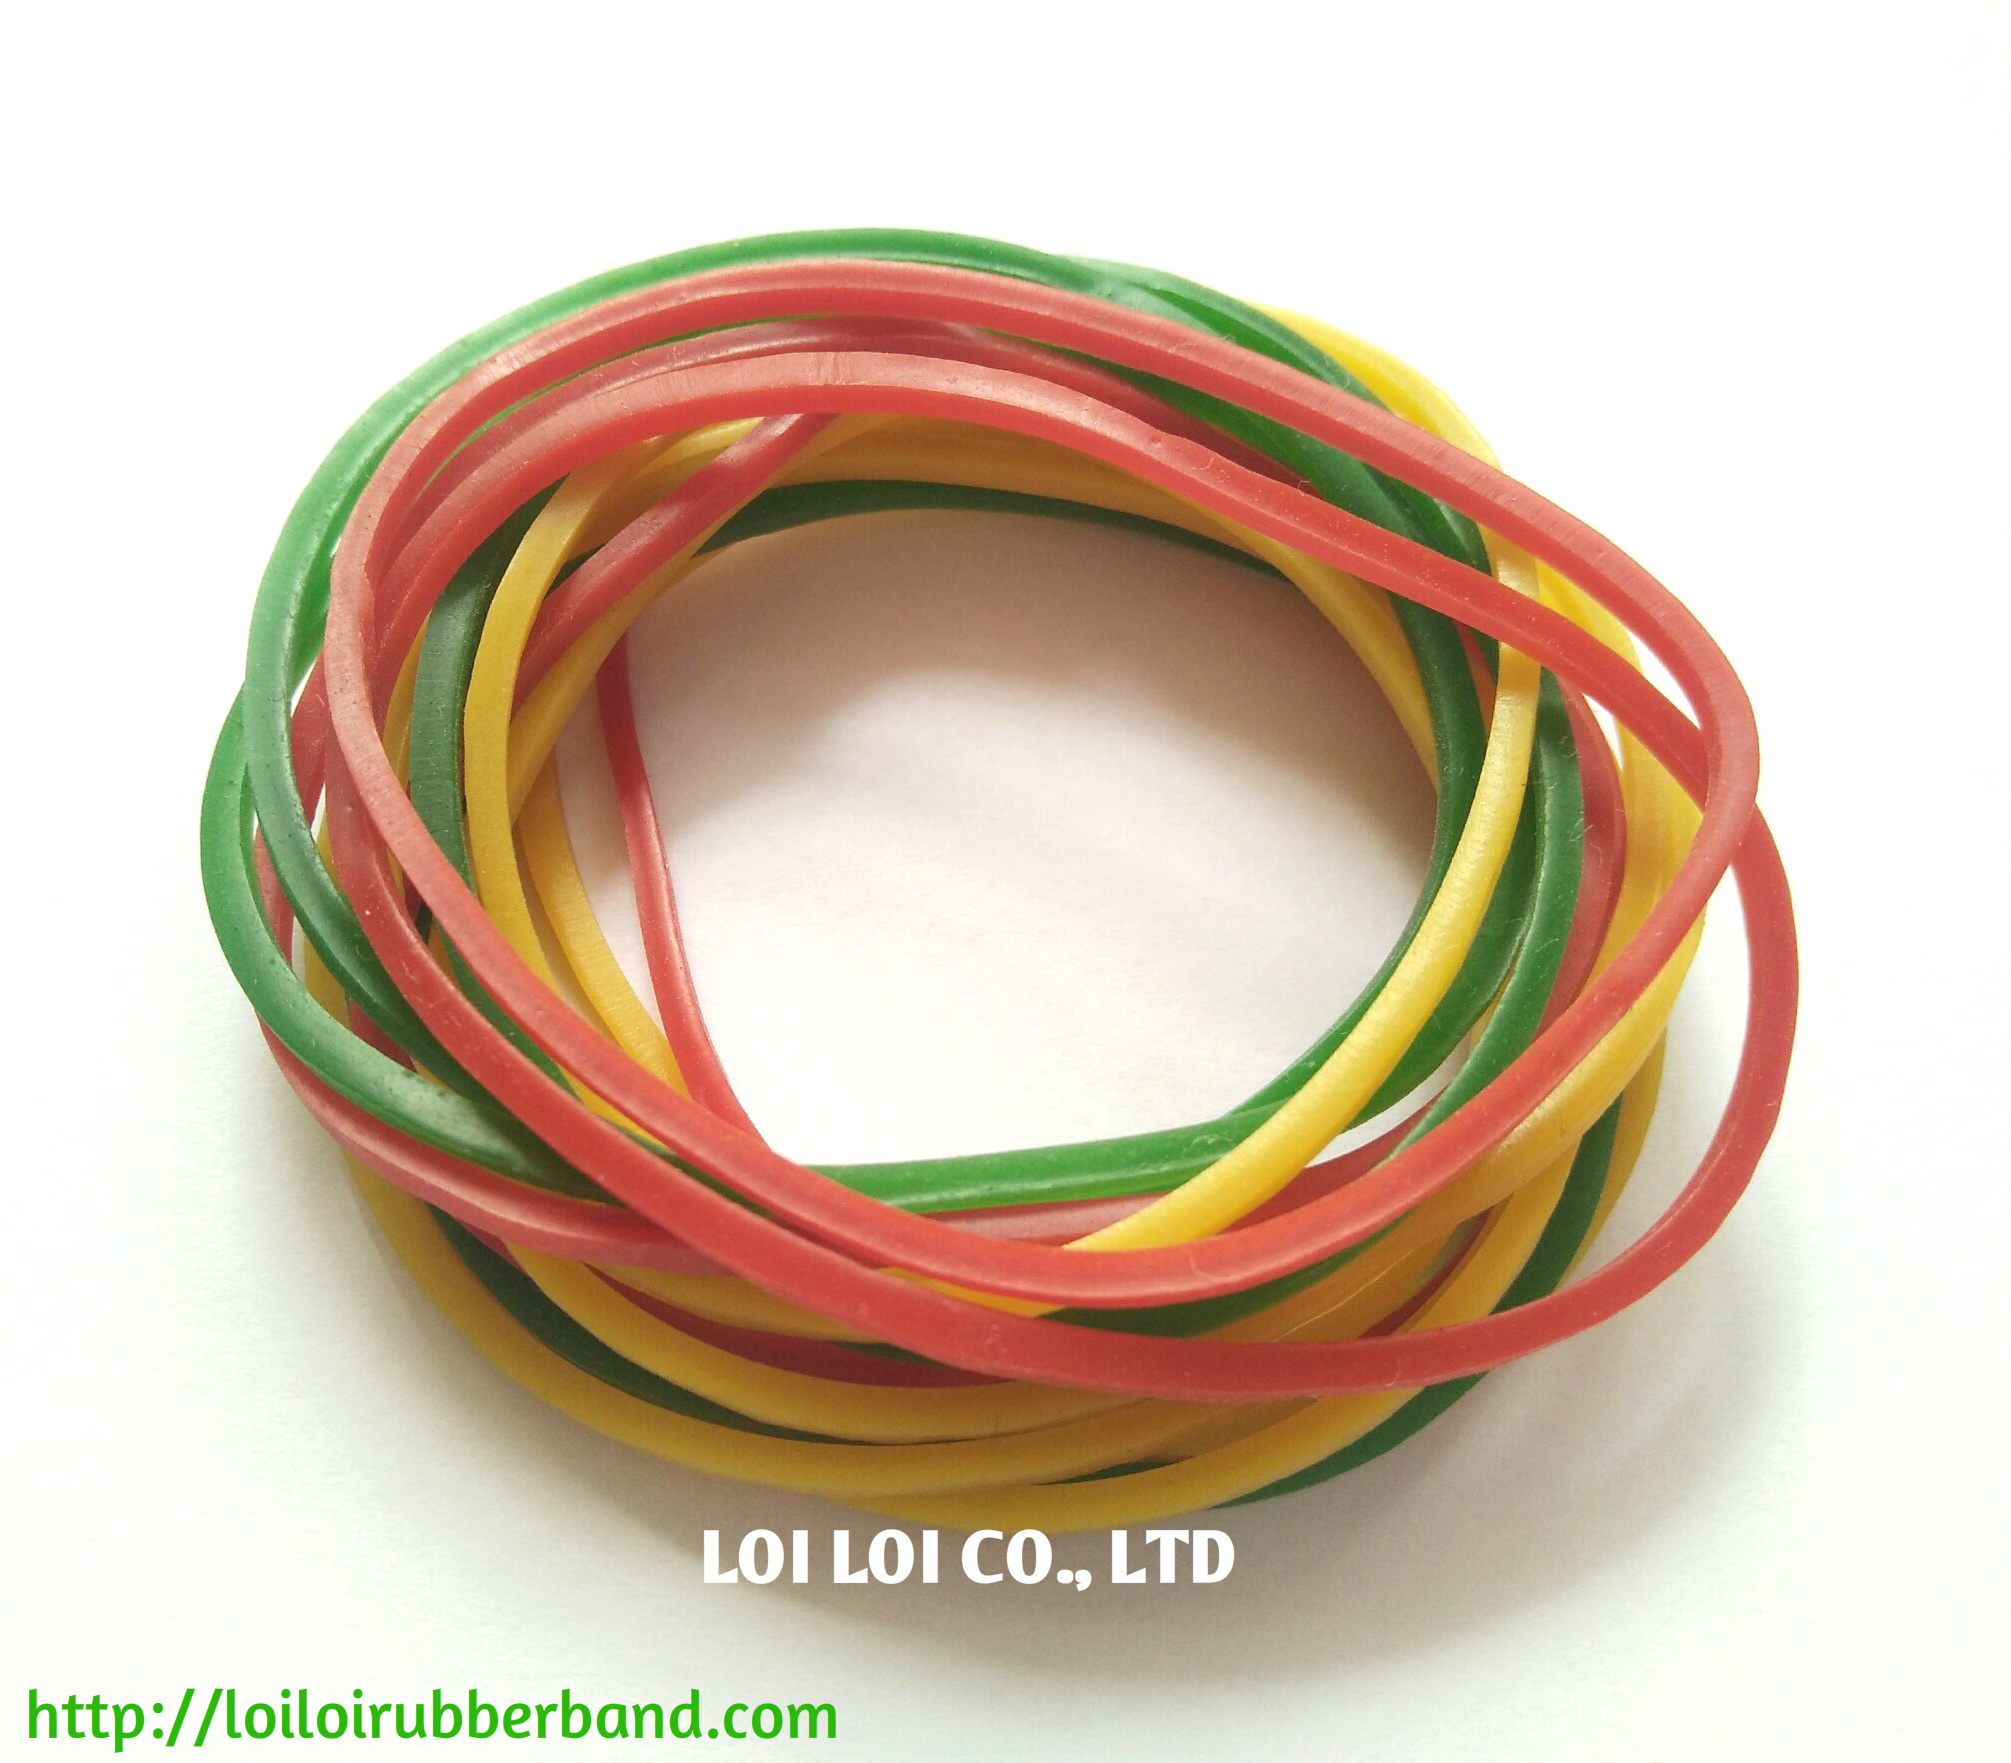 High-quality Thick Rubberband size 45mm x 1.4mm x 1.4mm / 100% Natural rubber band strong elastic for daily uses